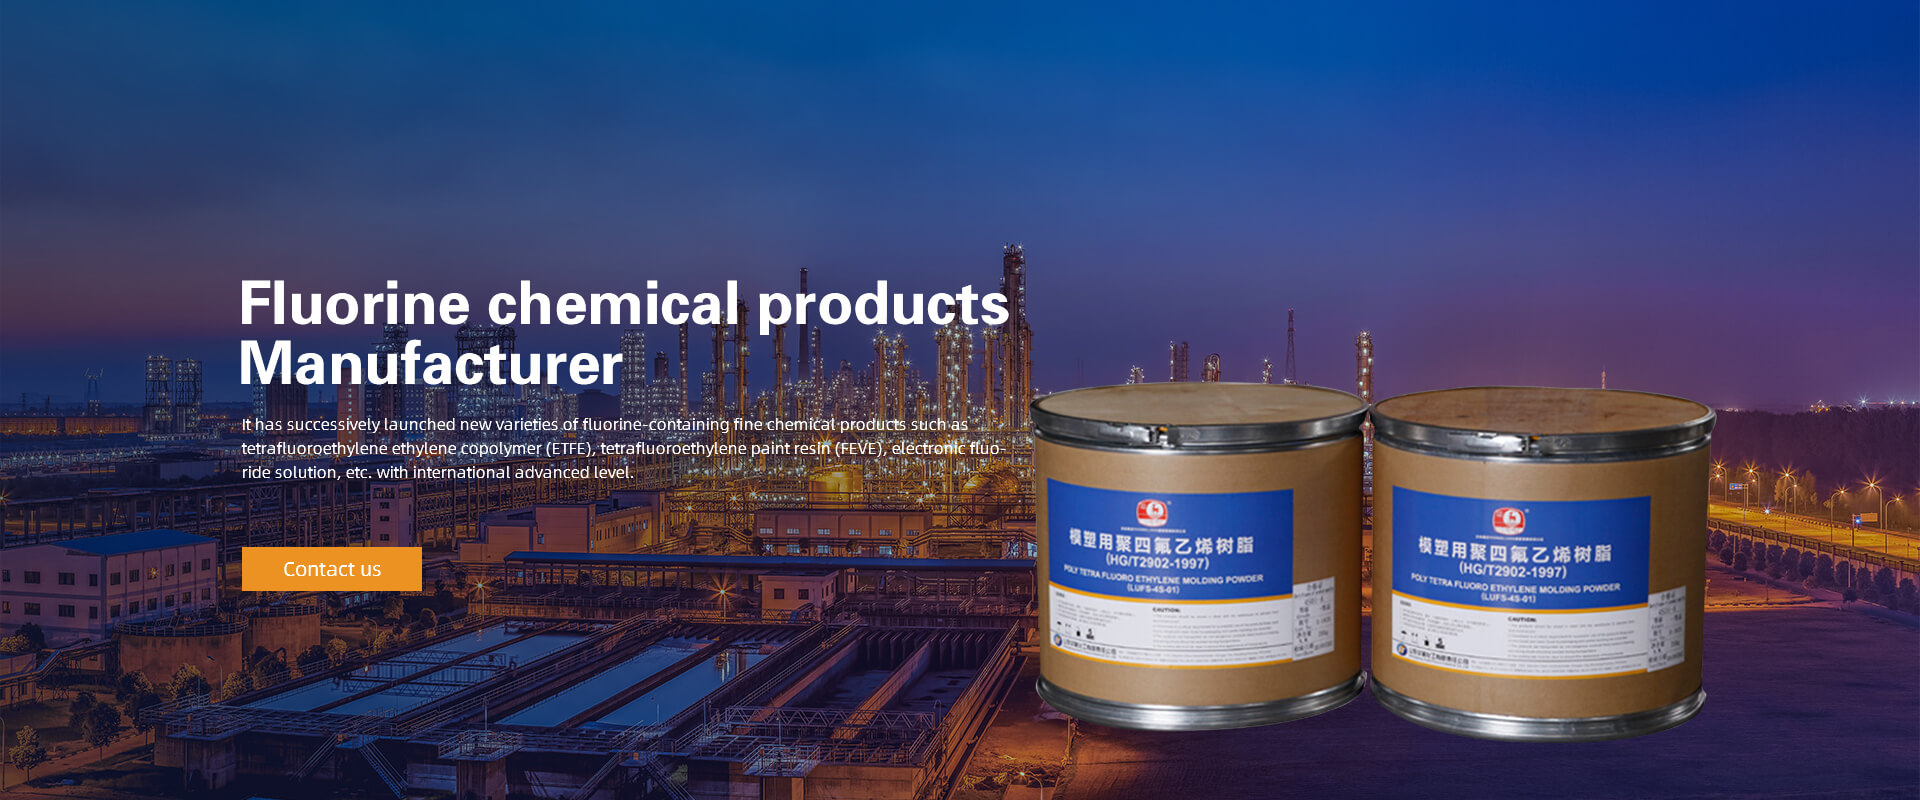 Fluorine chemical products Manufacturer